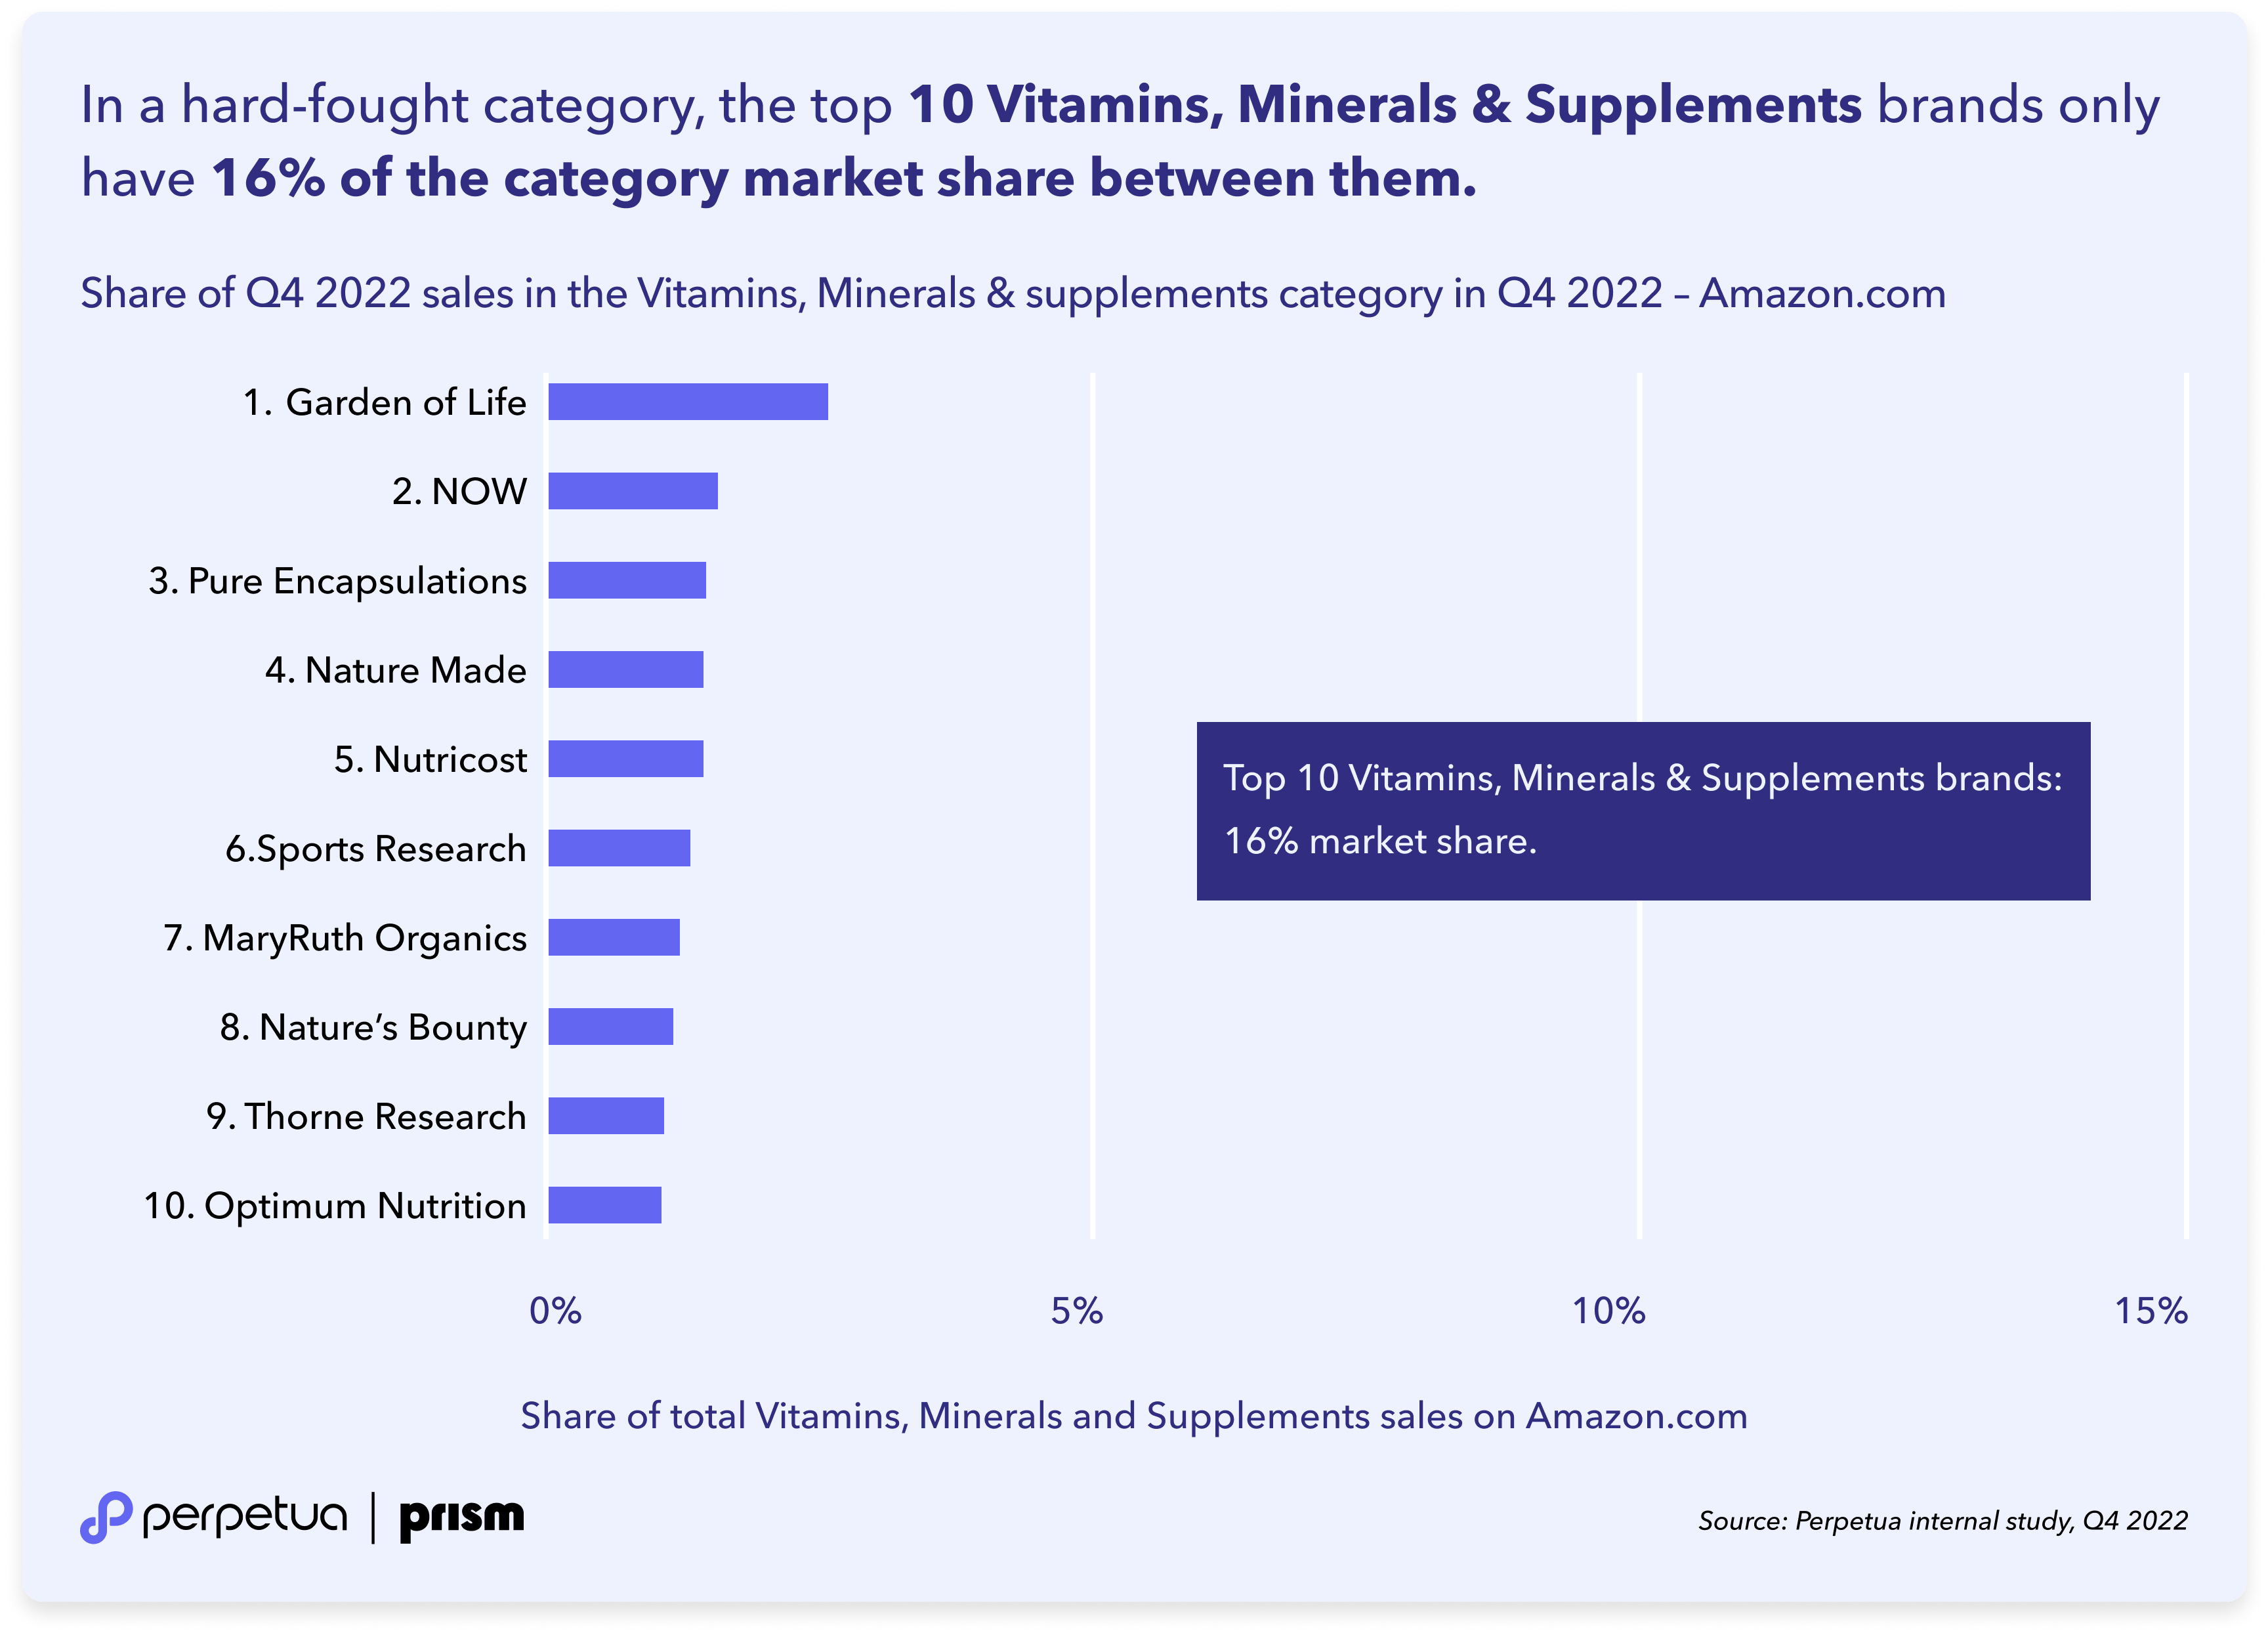 10-Perpetua Prism — In a hard-fought category, the top 10 Vitamins, Minerals & Supplements brands only have 16- of the category market share between them